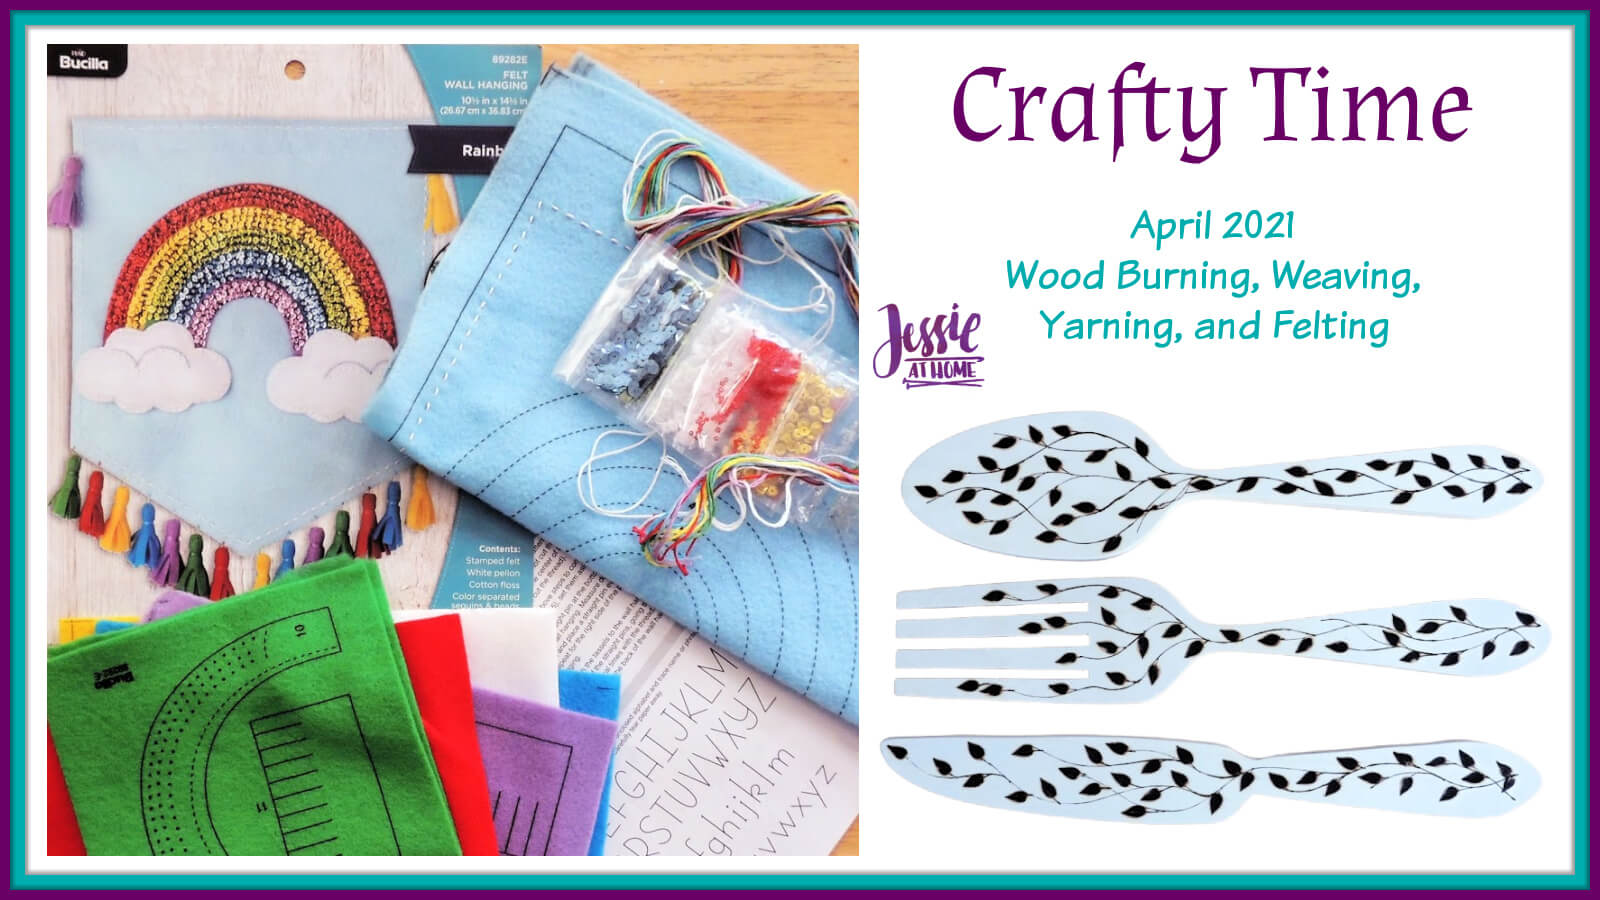 Wood Burning, Weaving, Yarning, and Felting – April 2021 Crafty Time with Jessie